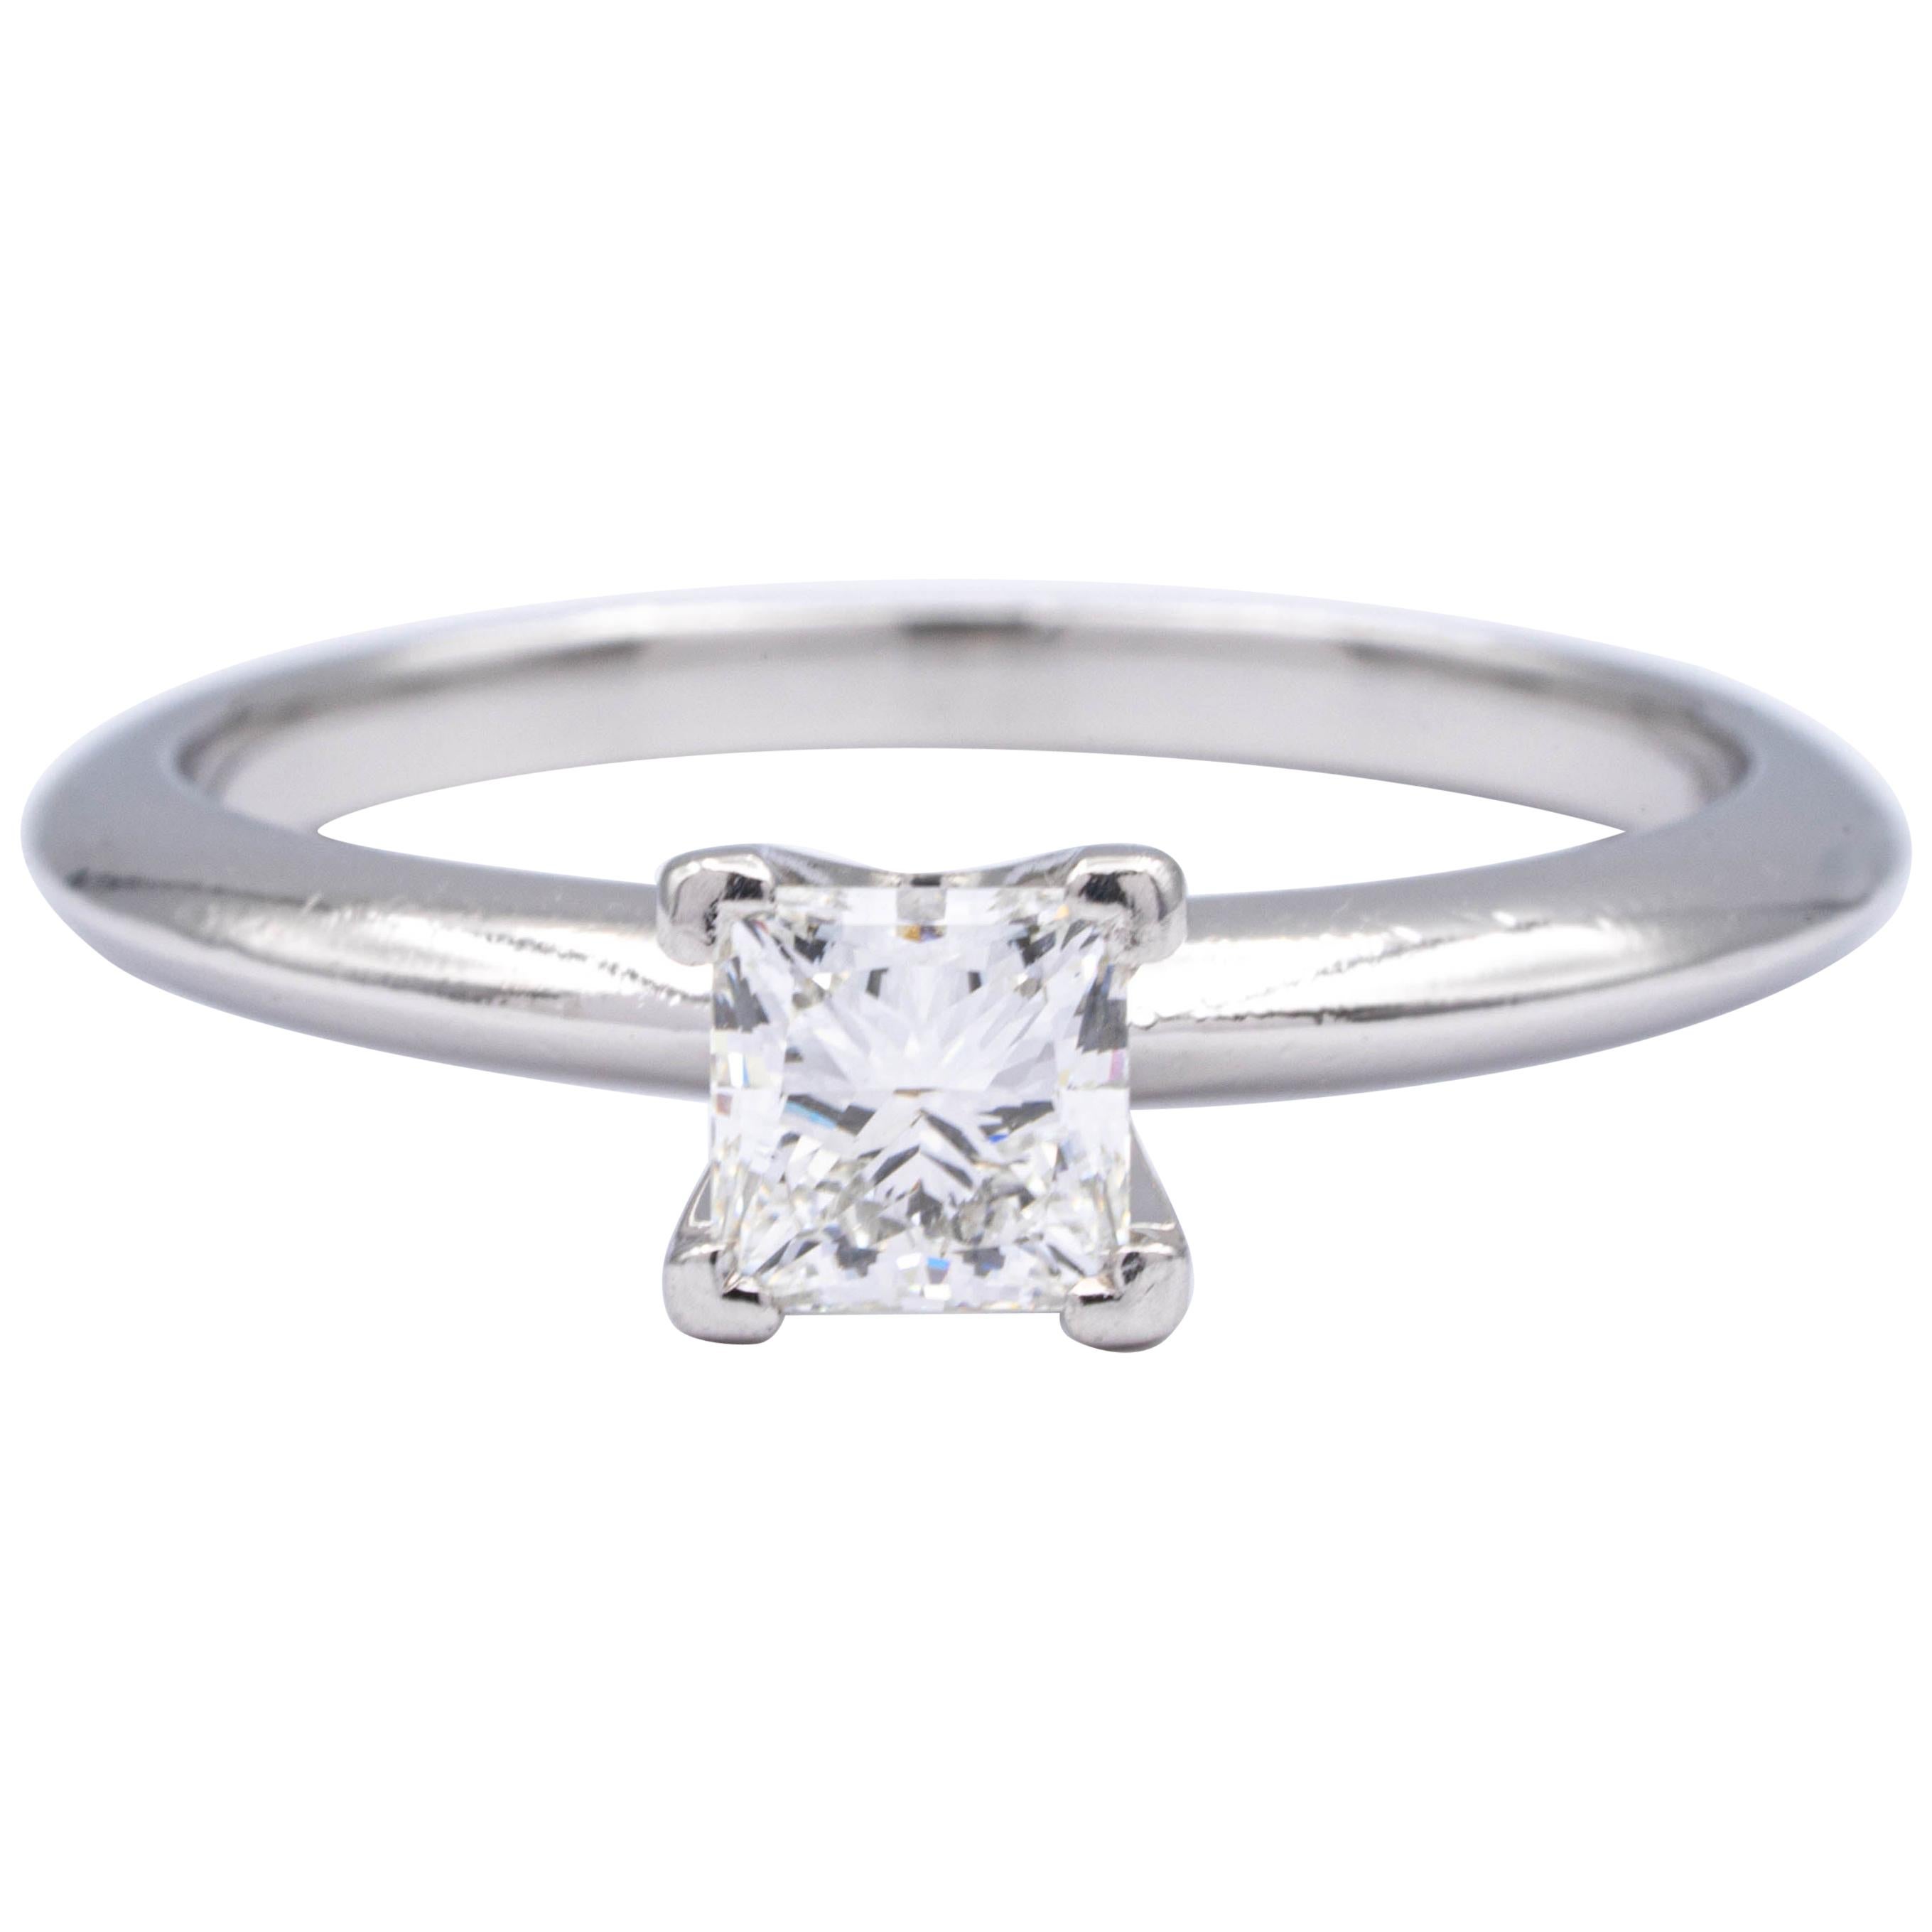 Tiffany & Co. Engagement Ring with .51 Carat H VVS1 Princess Cut in Platinum